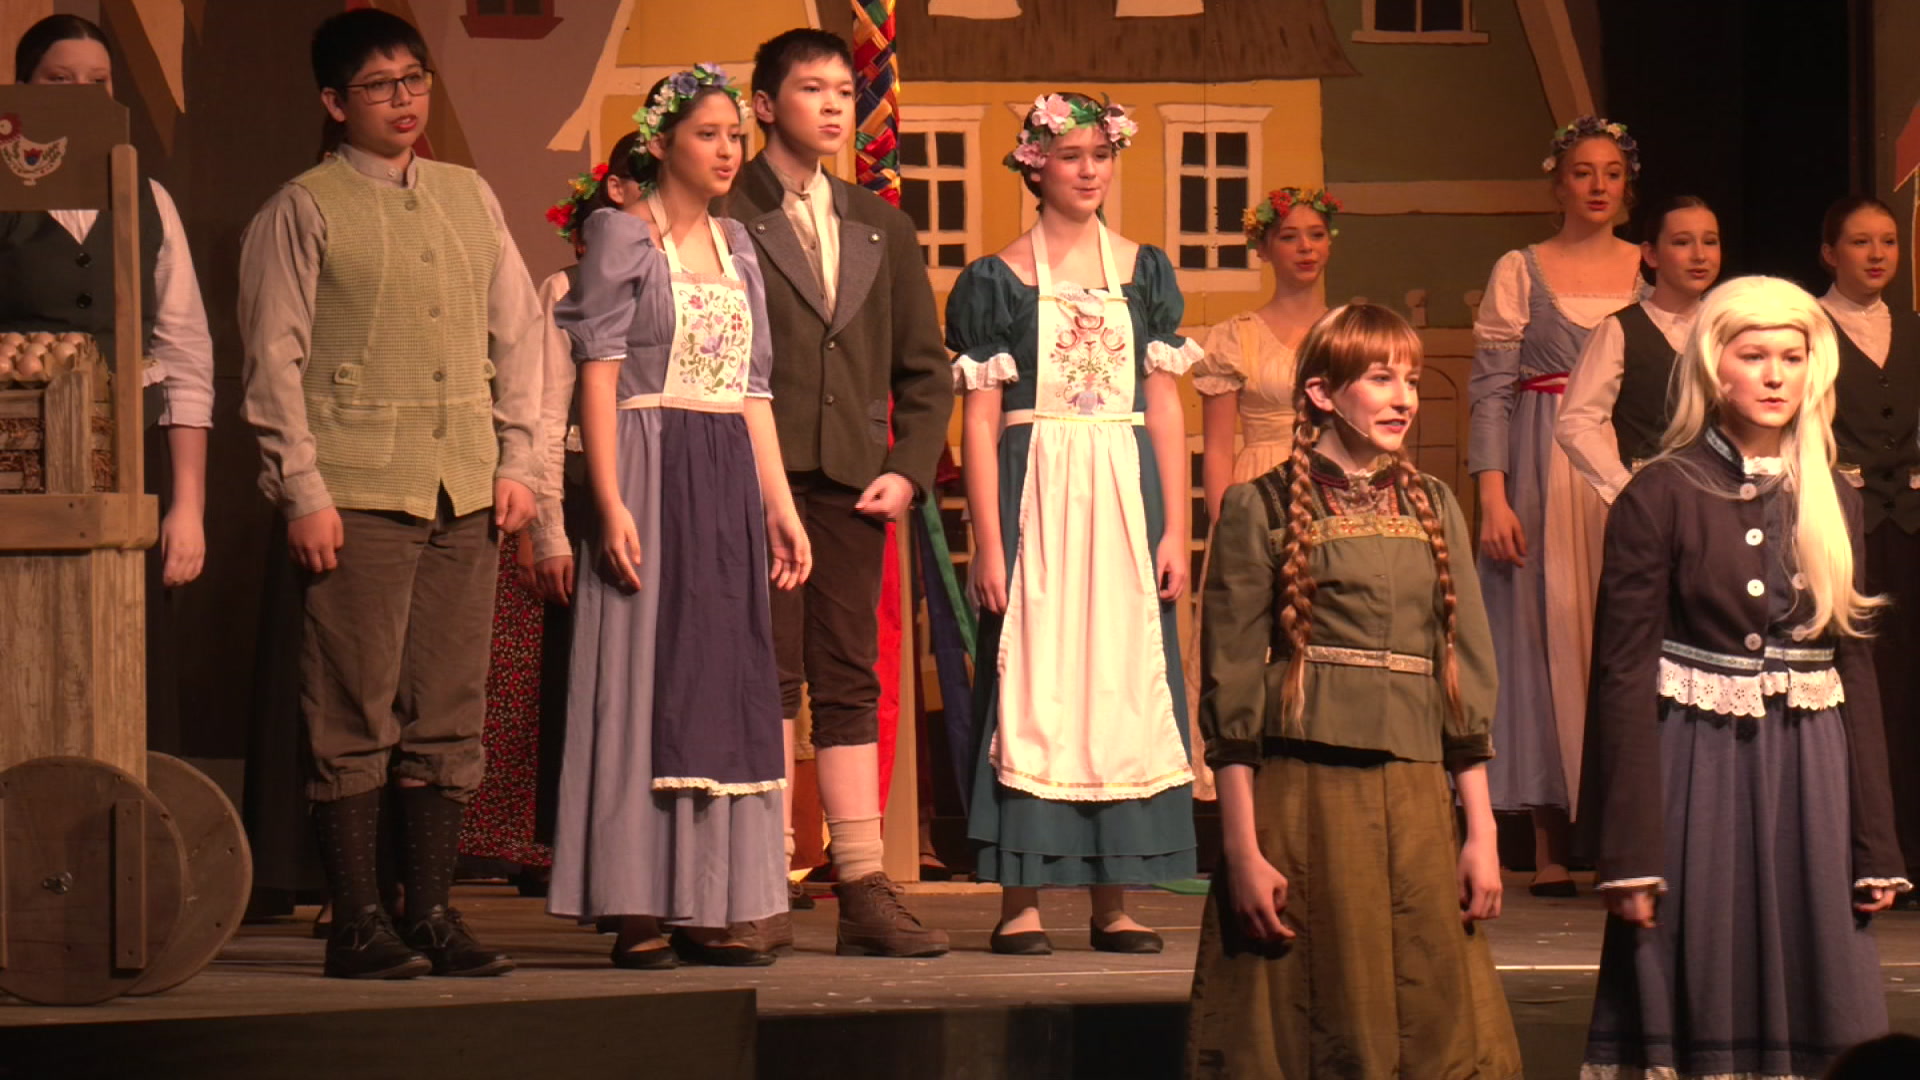 School Play Returns To Minnetonka’s Notre Dame Academy, Bringing ‘Semblance Of Normalcy’